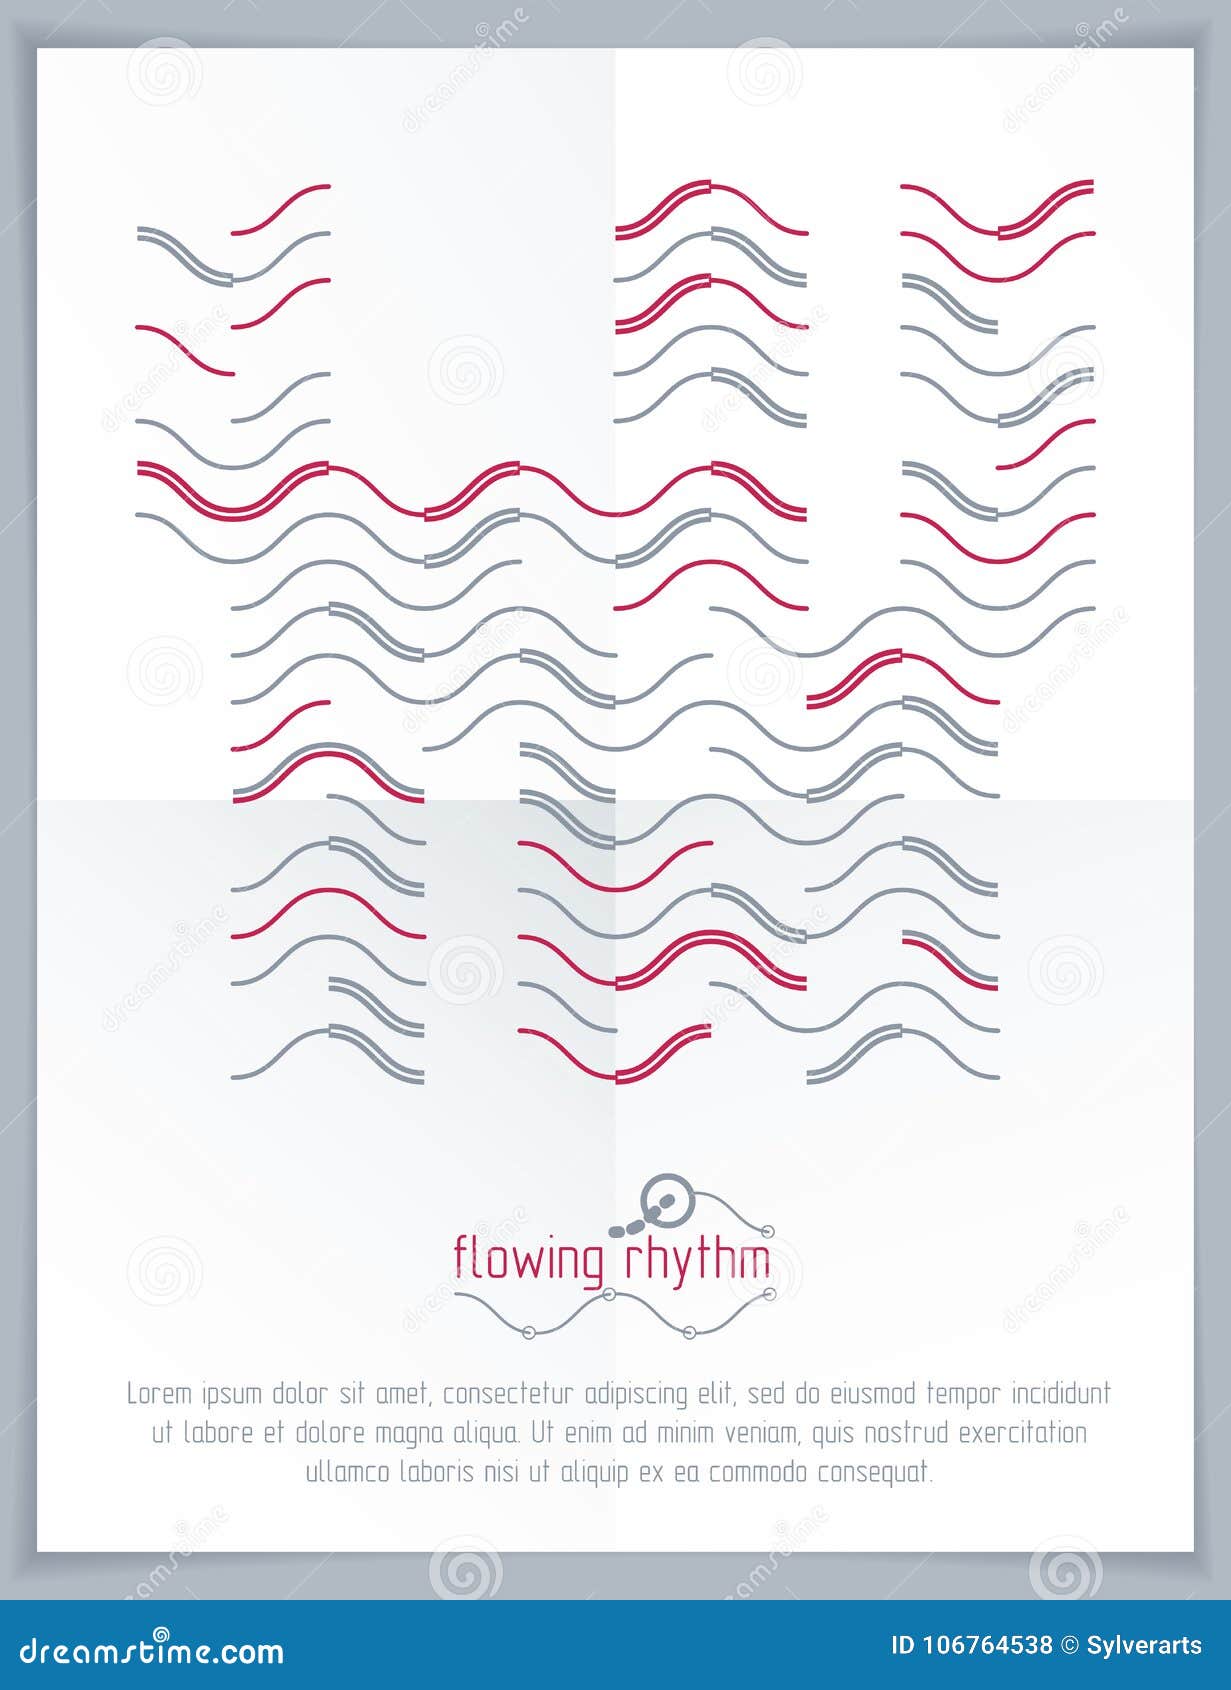 Flowing Rhythm Abstract Wave Lines Vector Background For Use As Stock Vector Illustration Of Data Chaos